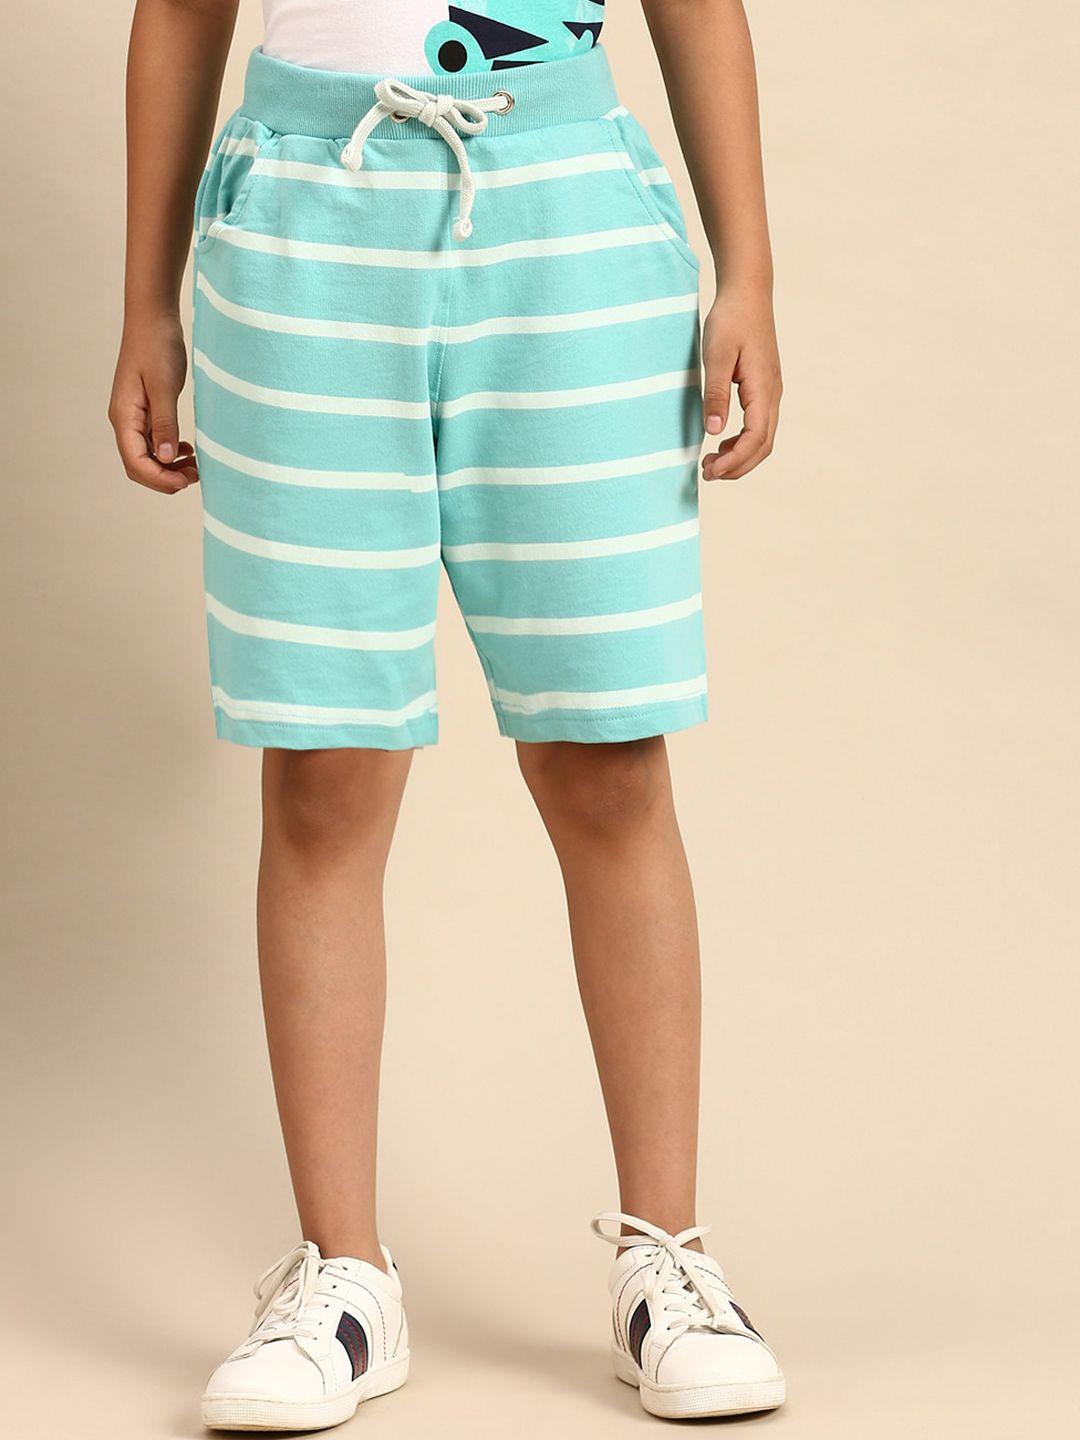 pipin boys blue and white striped shorts